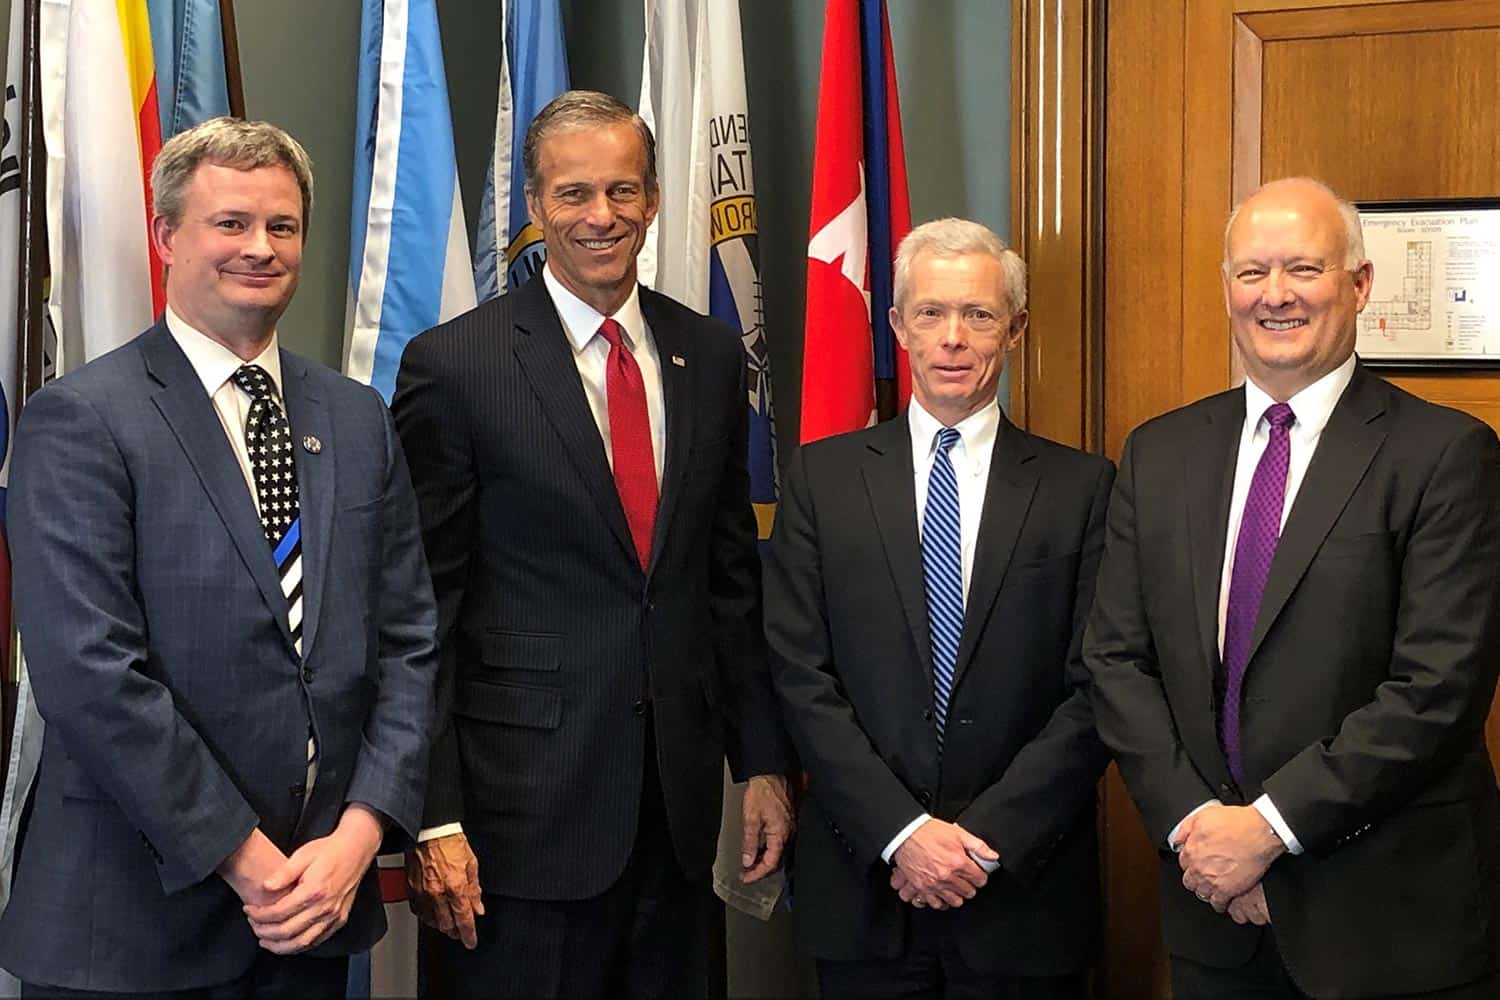 Sen. Thune with AGs